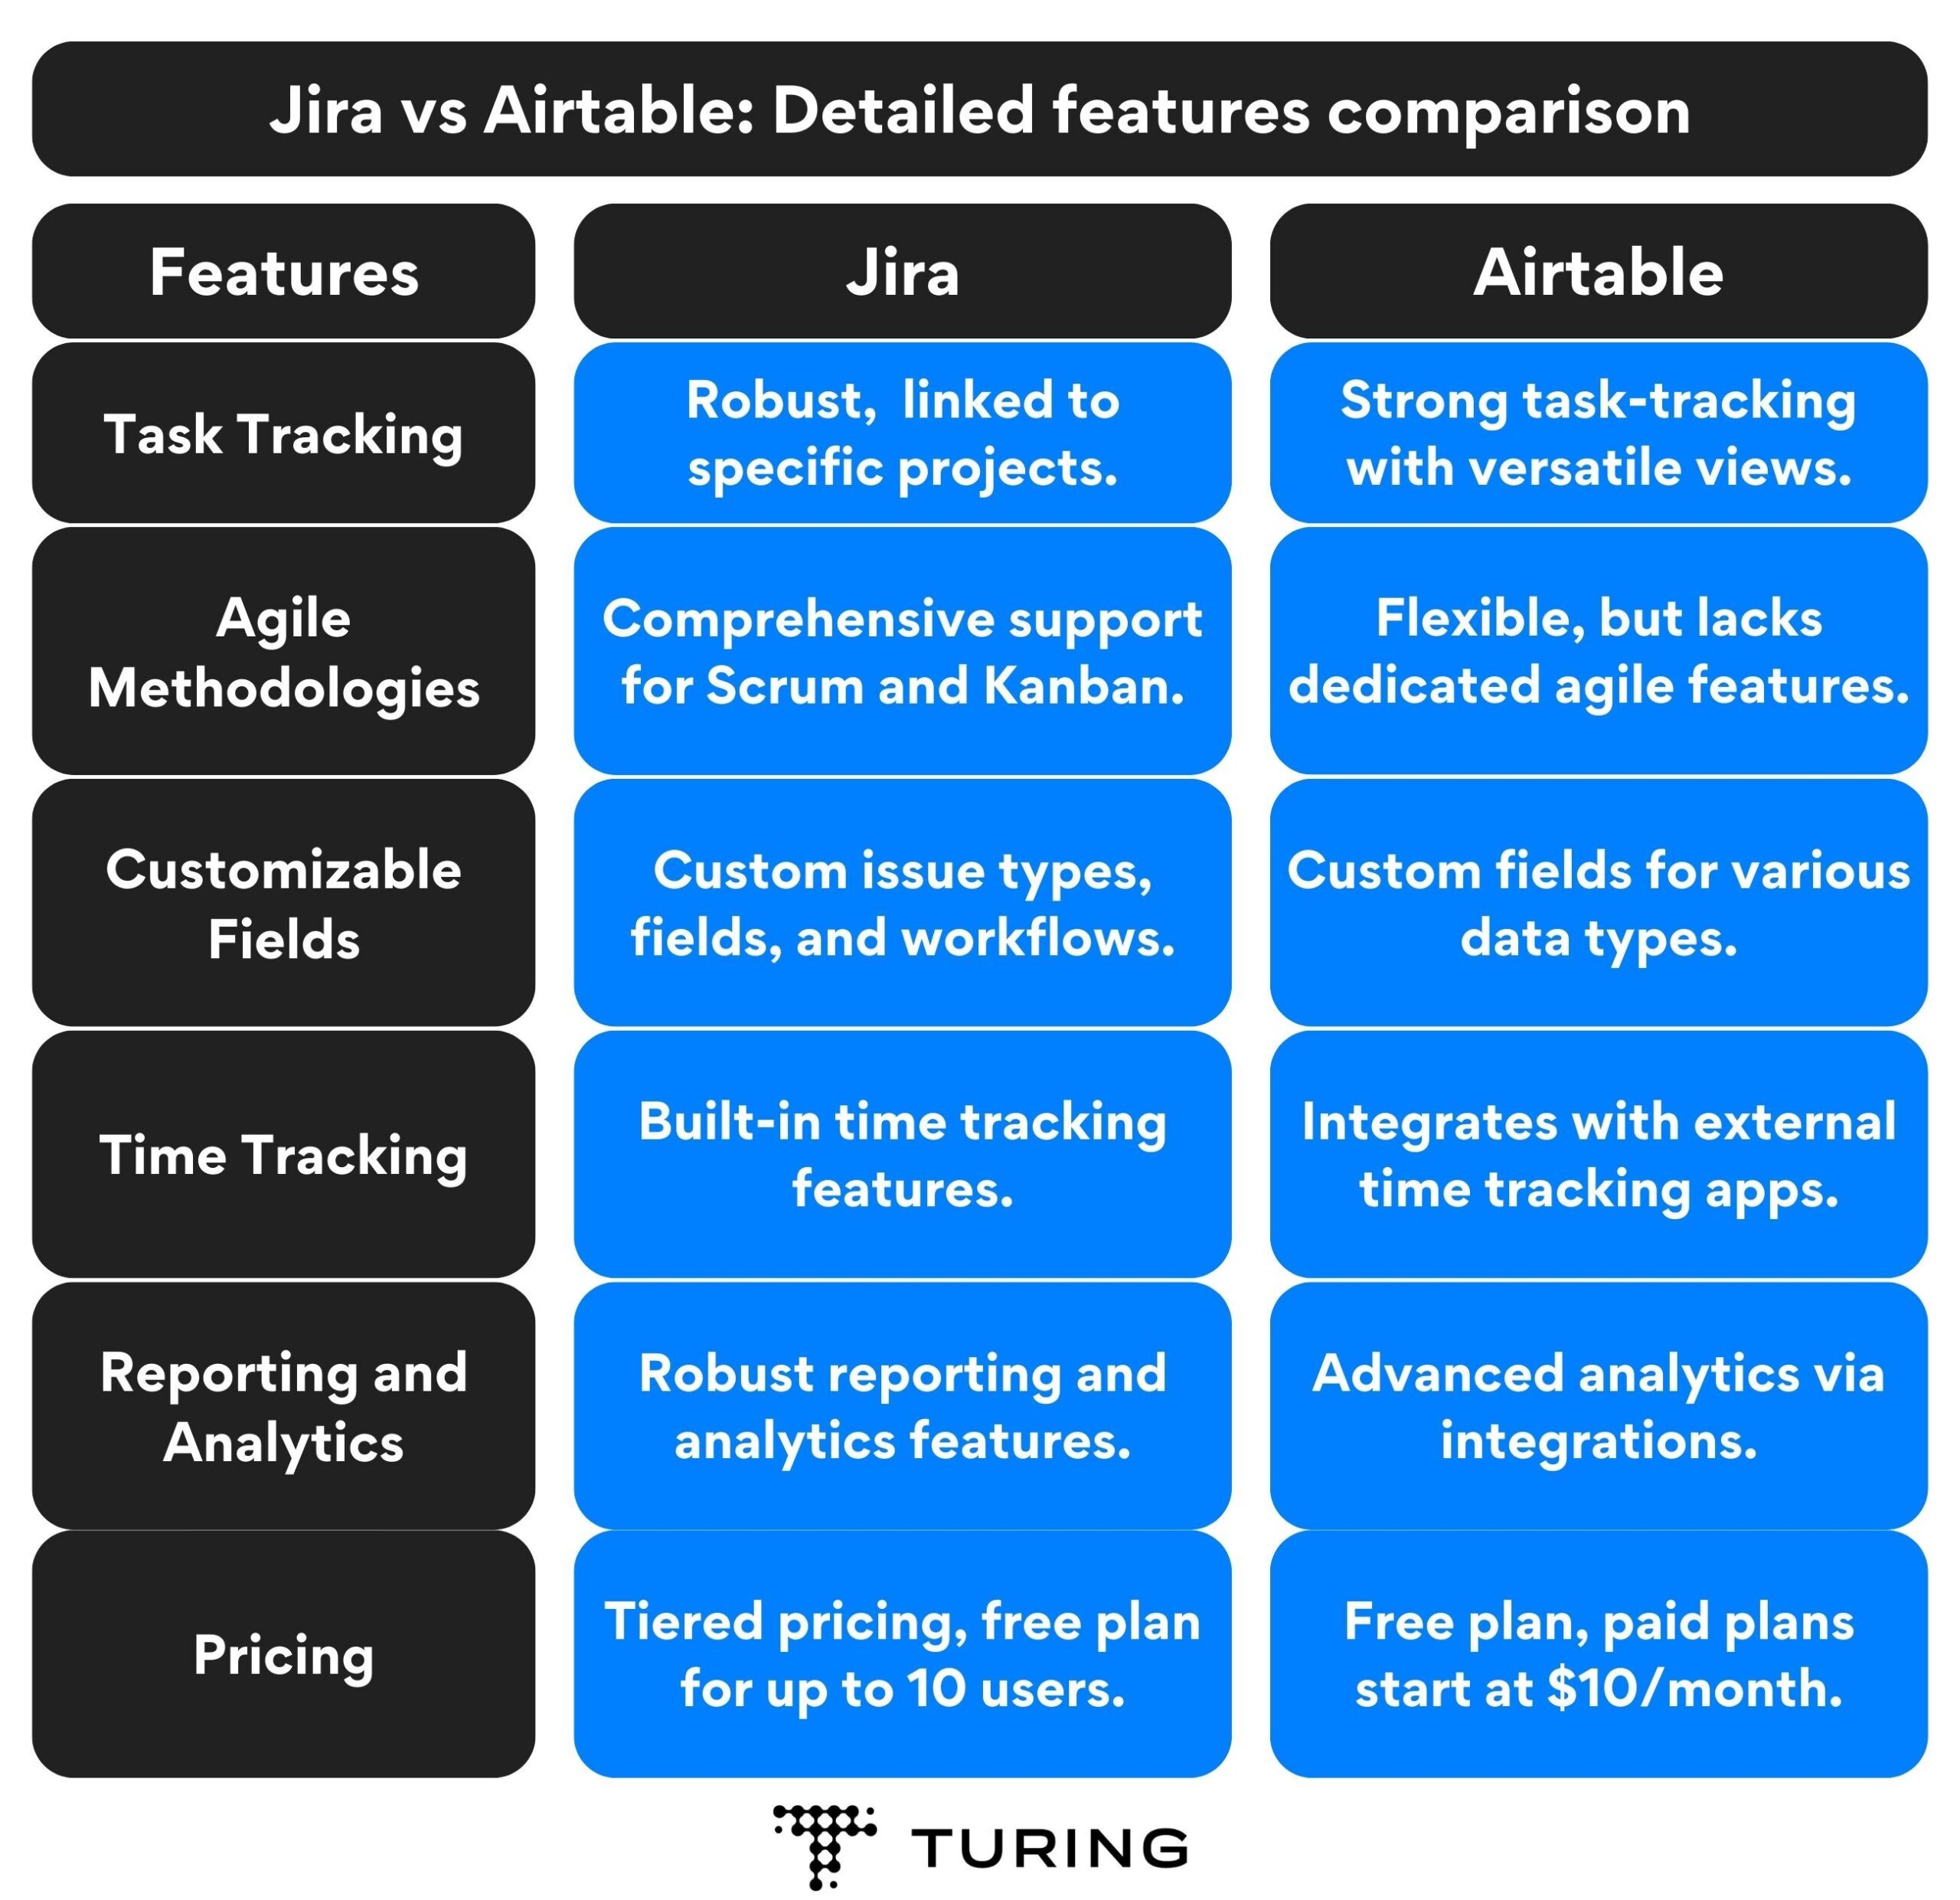 Jira vs Airtable: Detailed Features Comparison